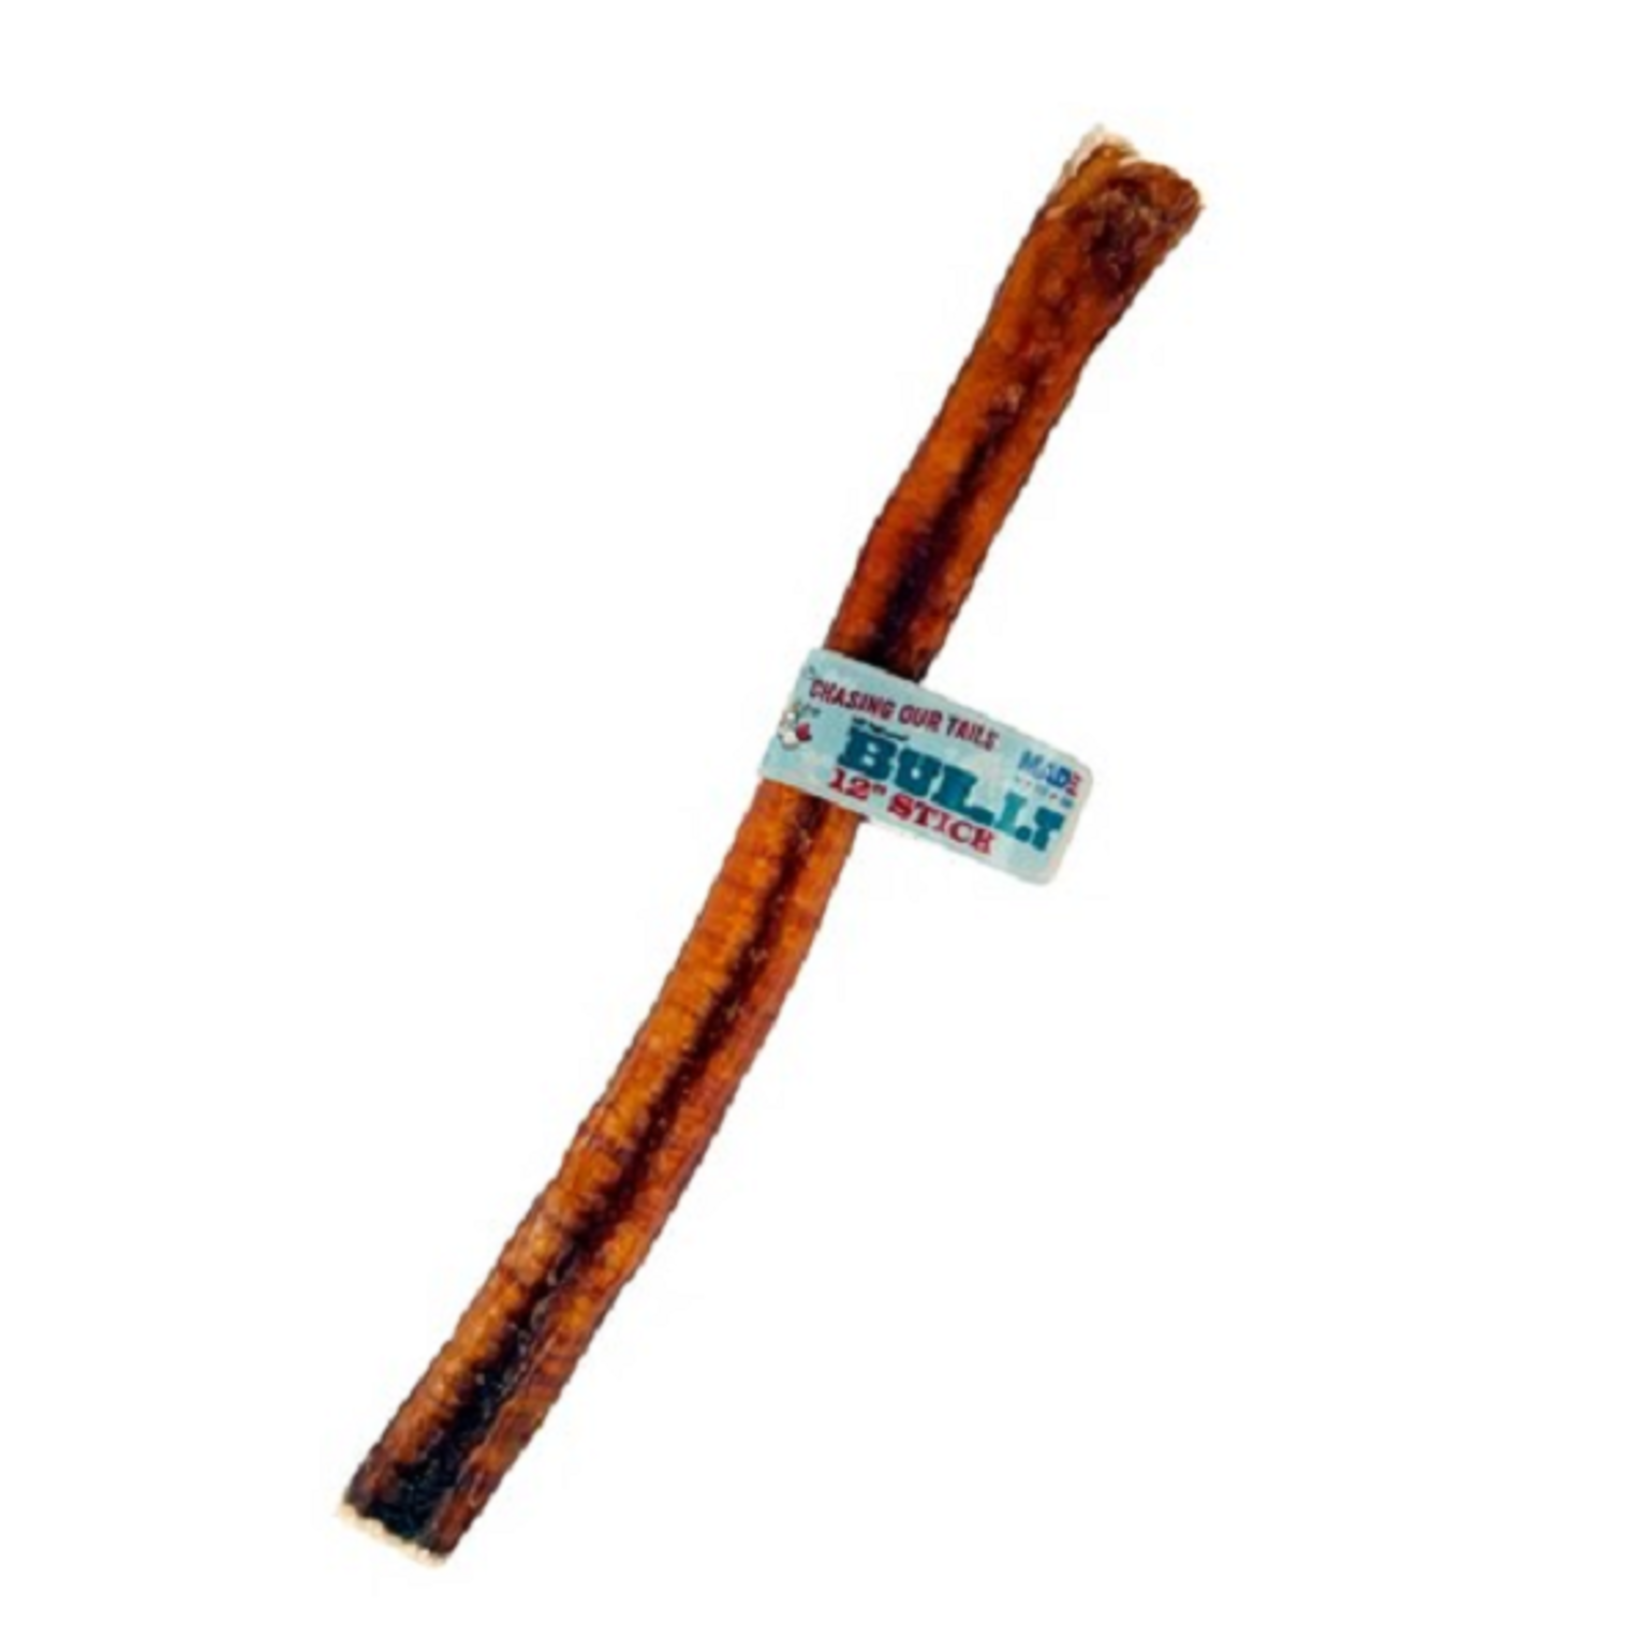 Chasing Our Tails 6" or 12" Bully Stick - Regular or Jumbo - Odorless - Chasing Our Tails